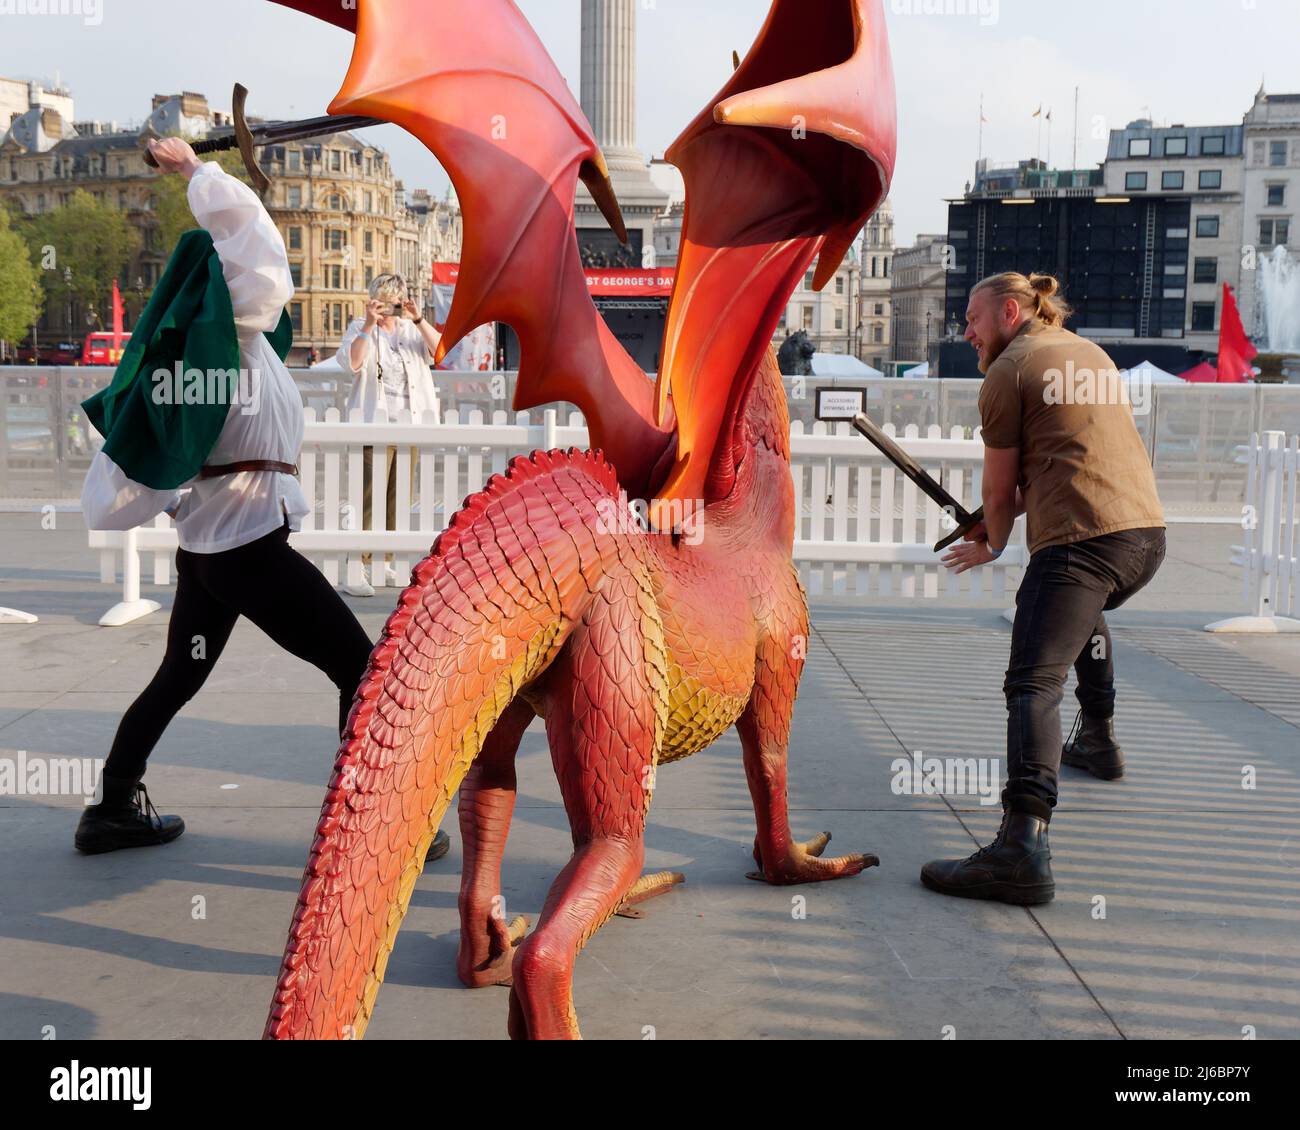 London, Greater London, England, April 23 2022: Staff at the St Georges day celebration in Trafalgar Square pretending to fight the dragon. Stock Photo